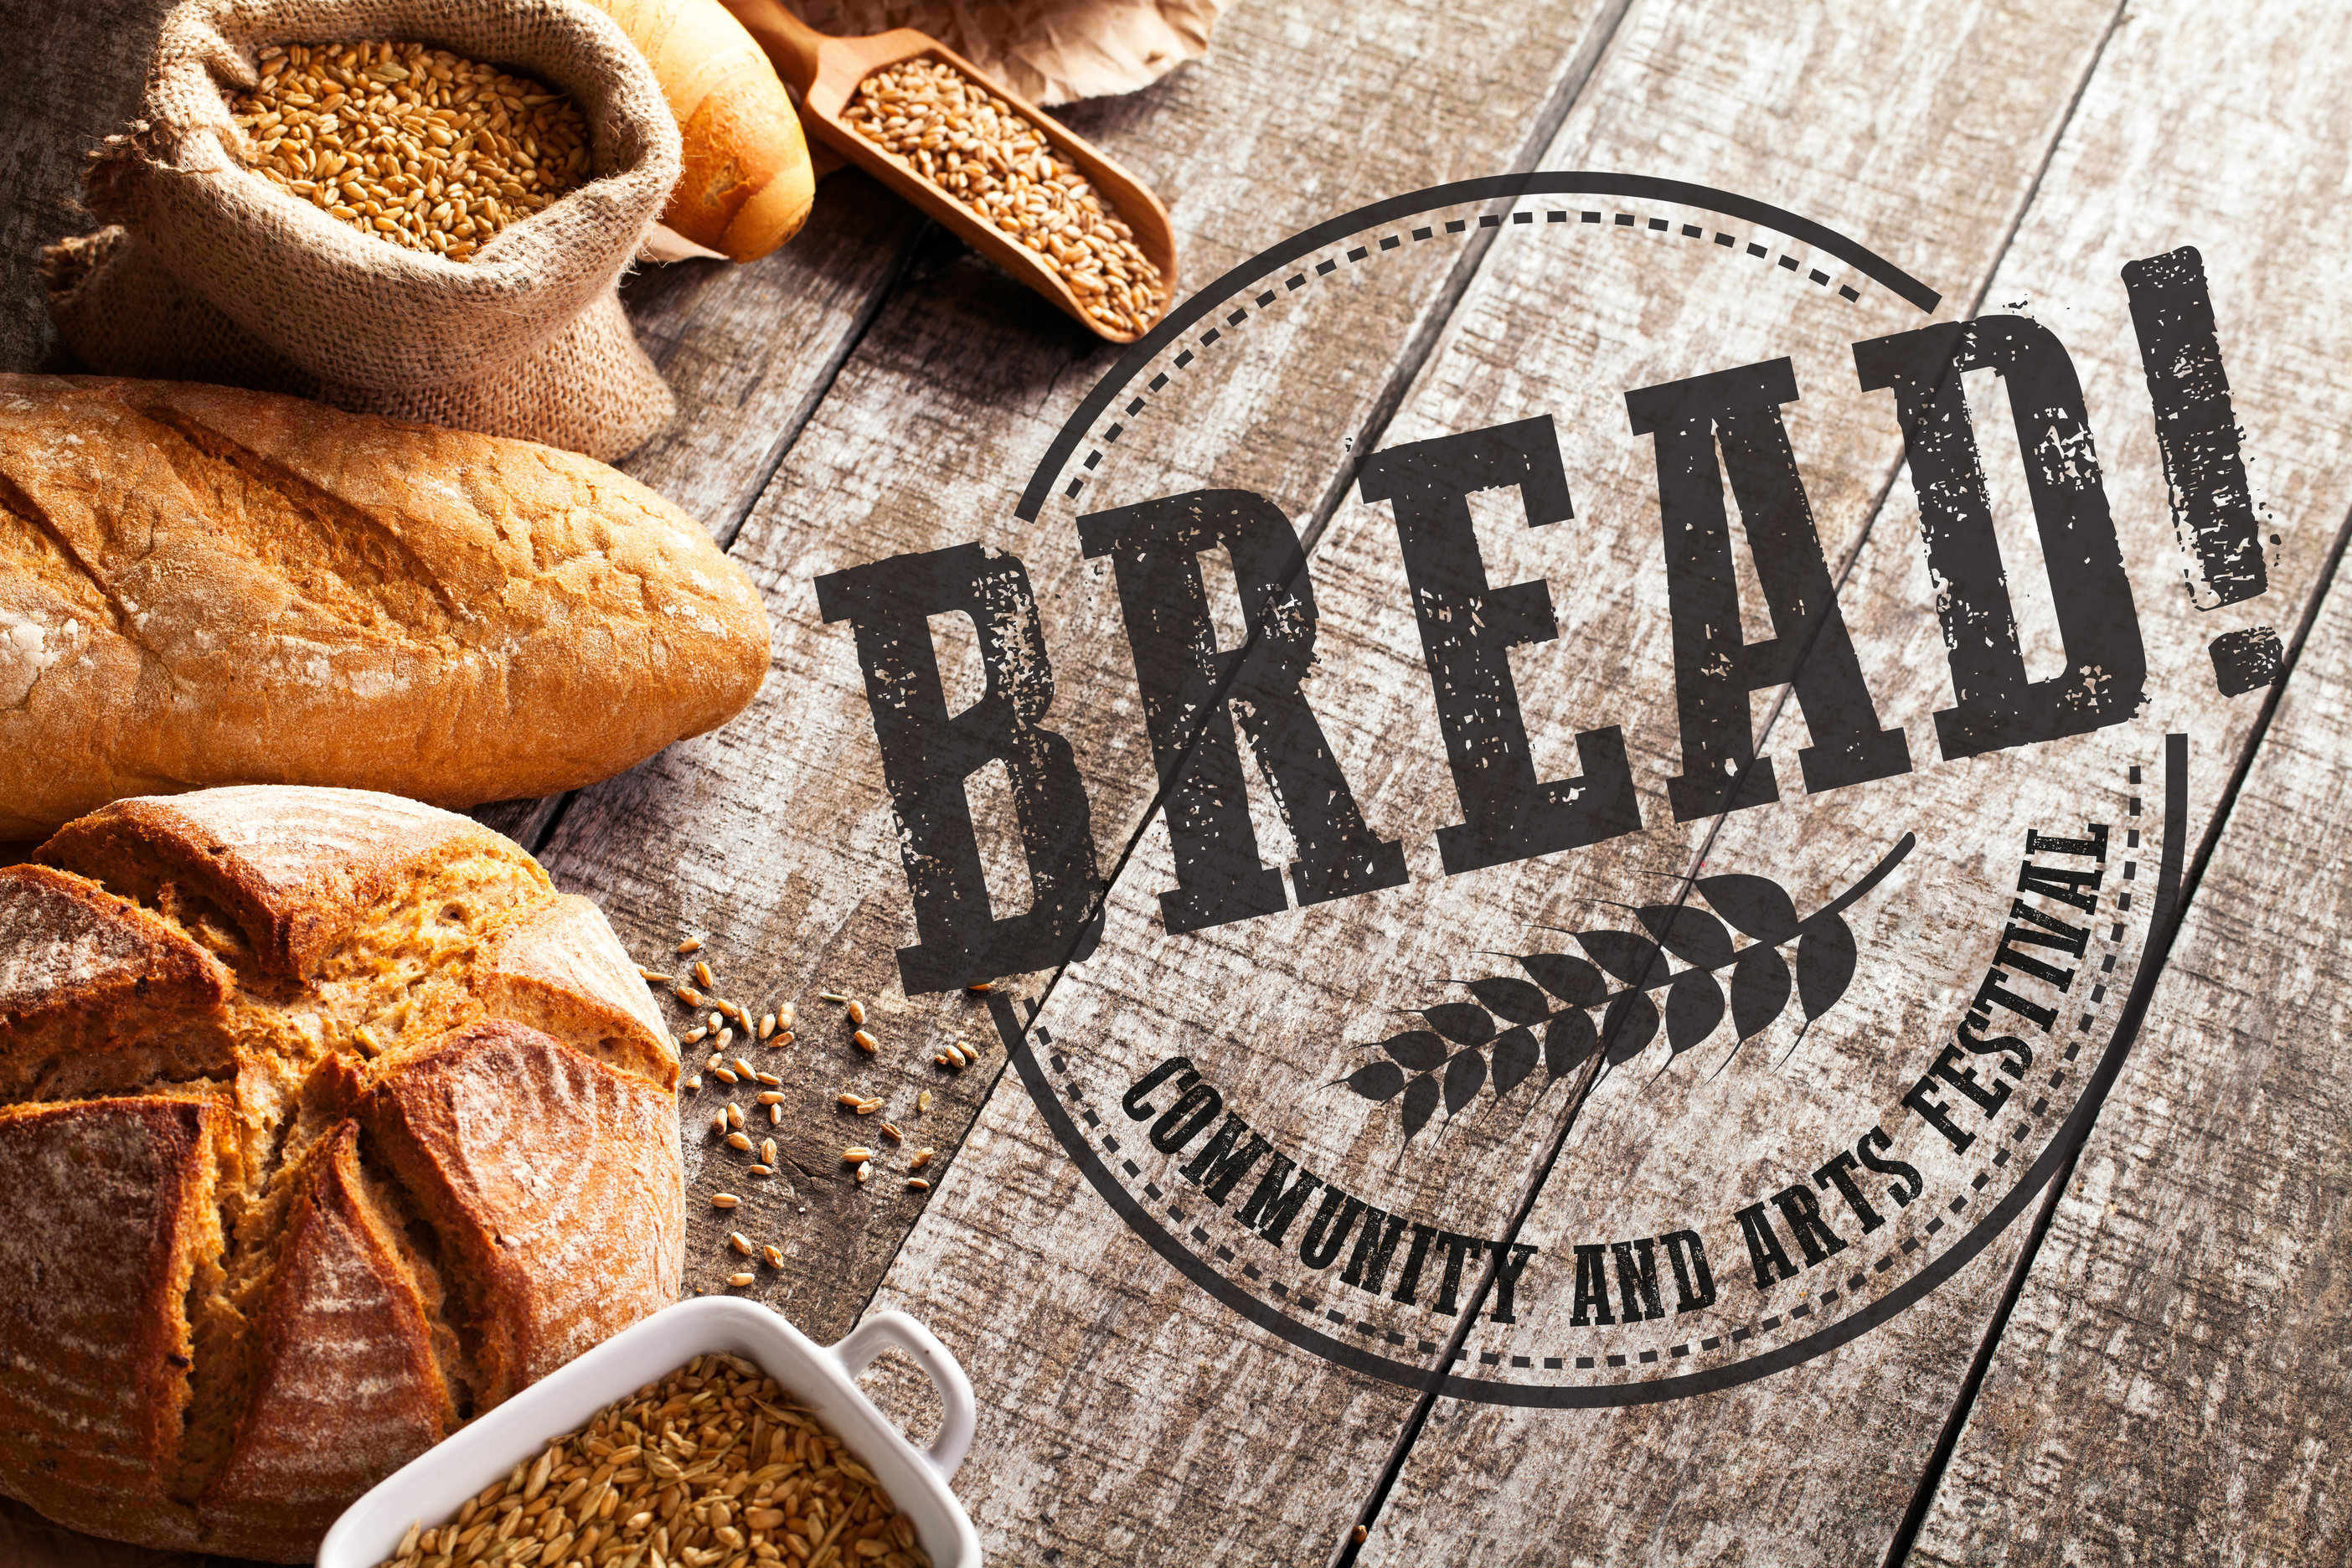 BREAD A FESTIVAL OF ARTS AND COMMUNITY ⋆ Puffin Foundation West, Ltd.